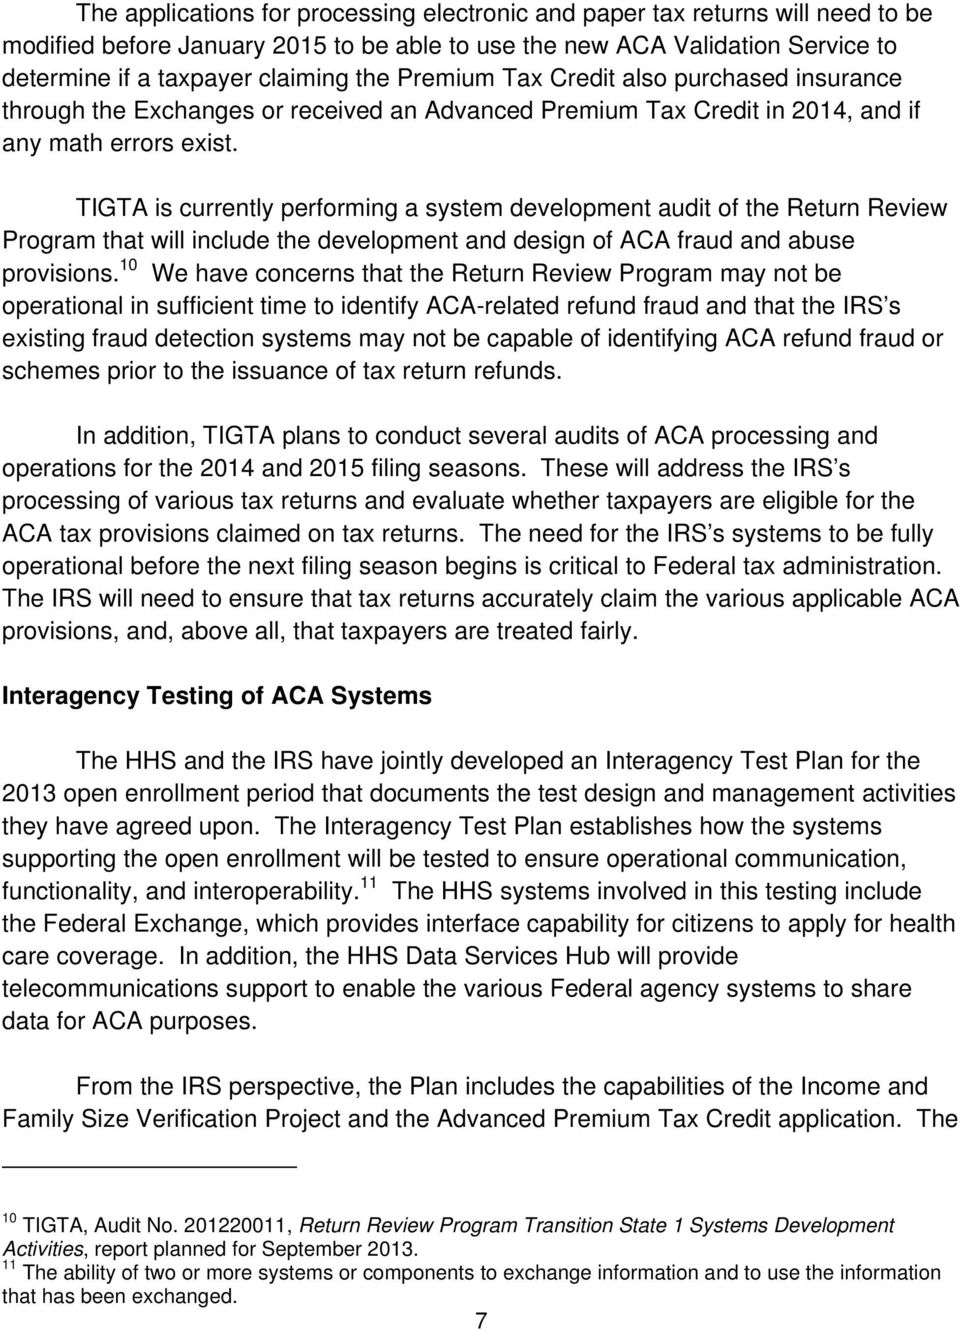 TIGTA is currently performing a system development audit of the Return Review Program that will include the development and design of ACA fraud and abuse provisions.